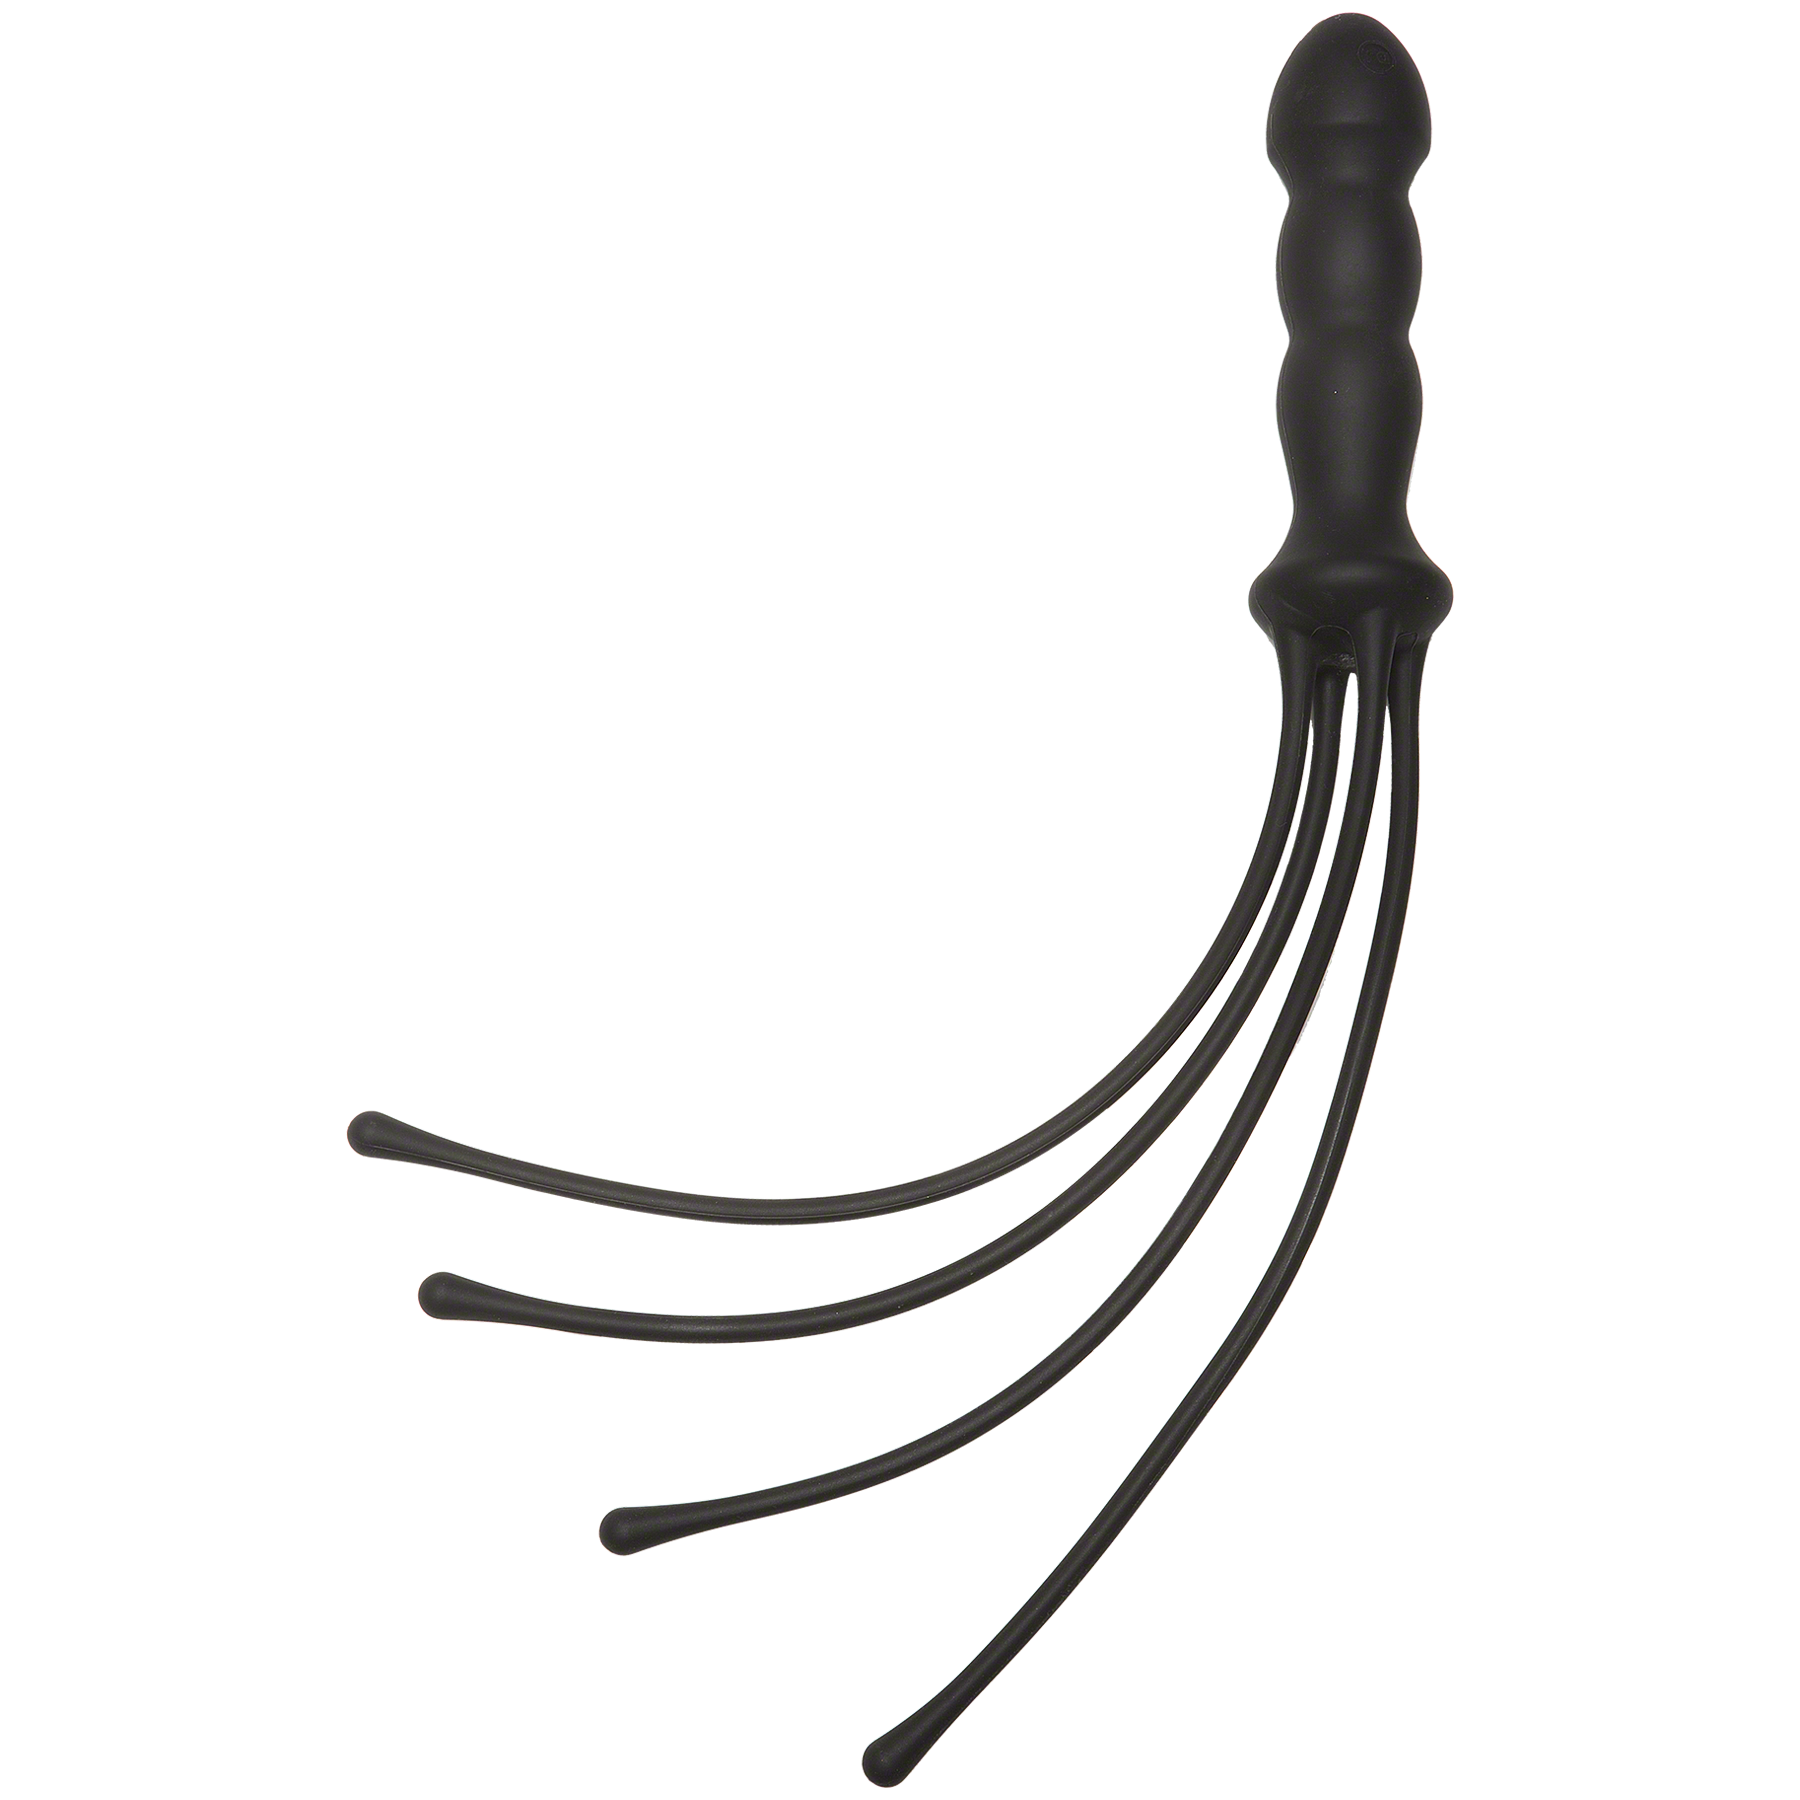 KINK THE QUAD SILICONE WHIP 18 BLACK "